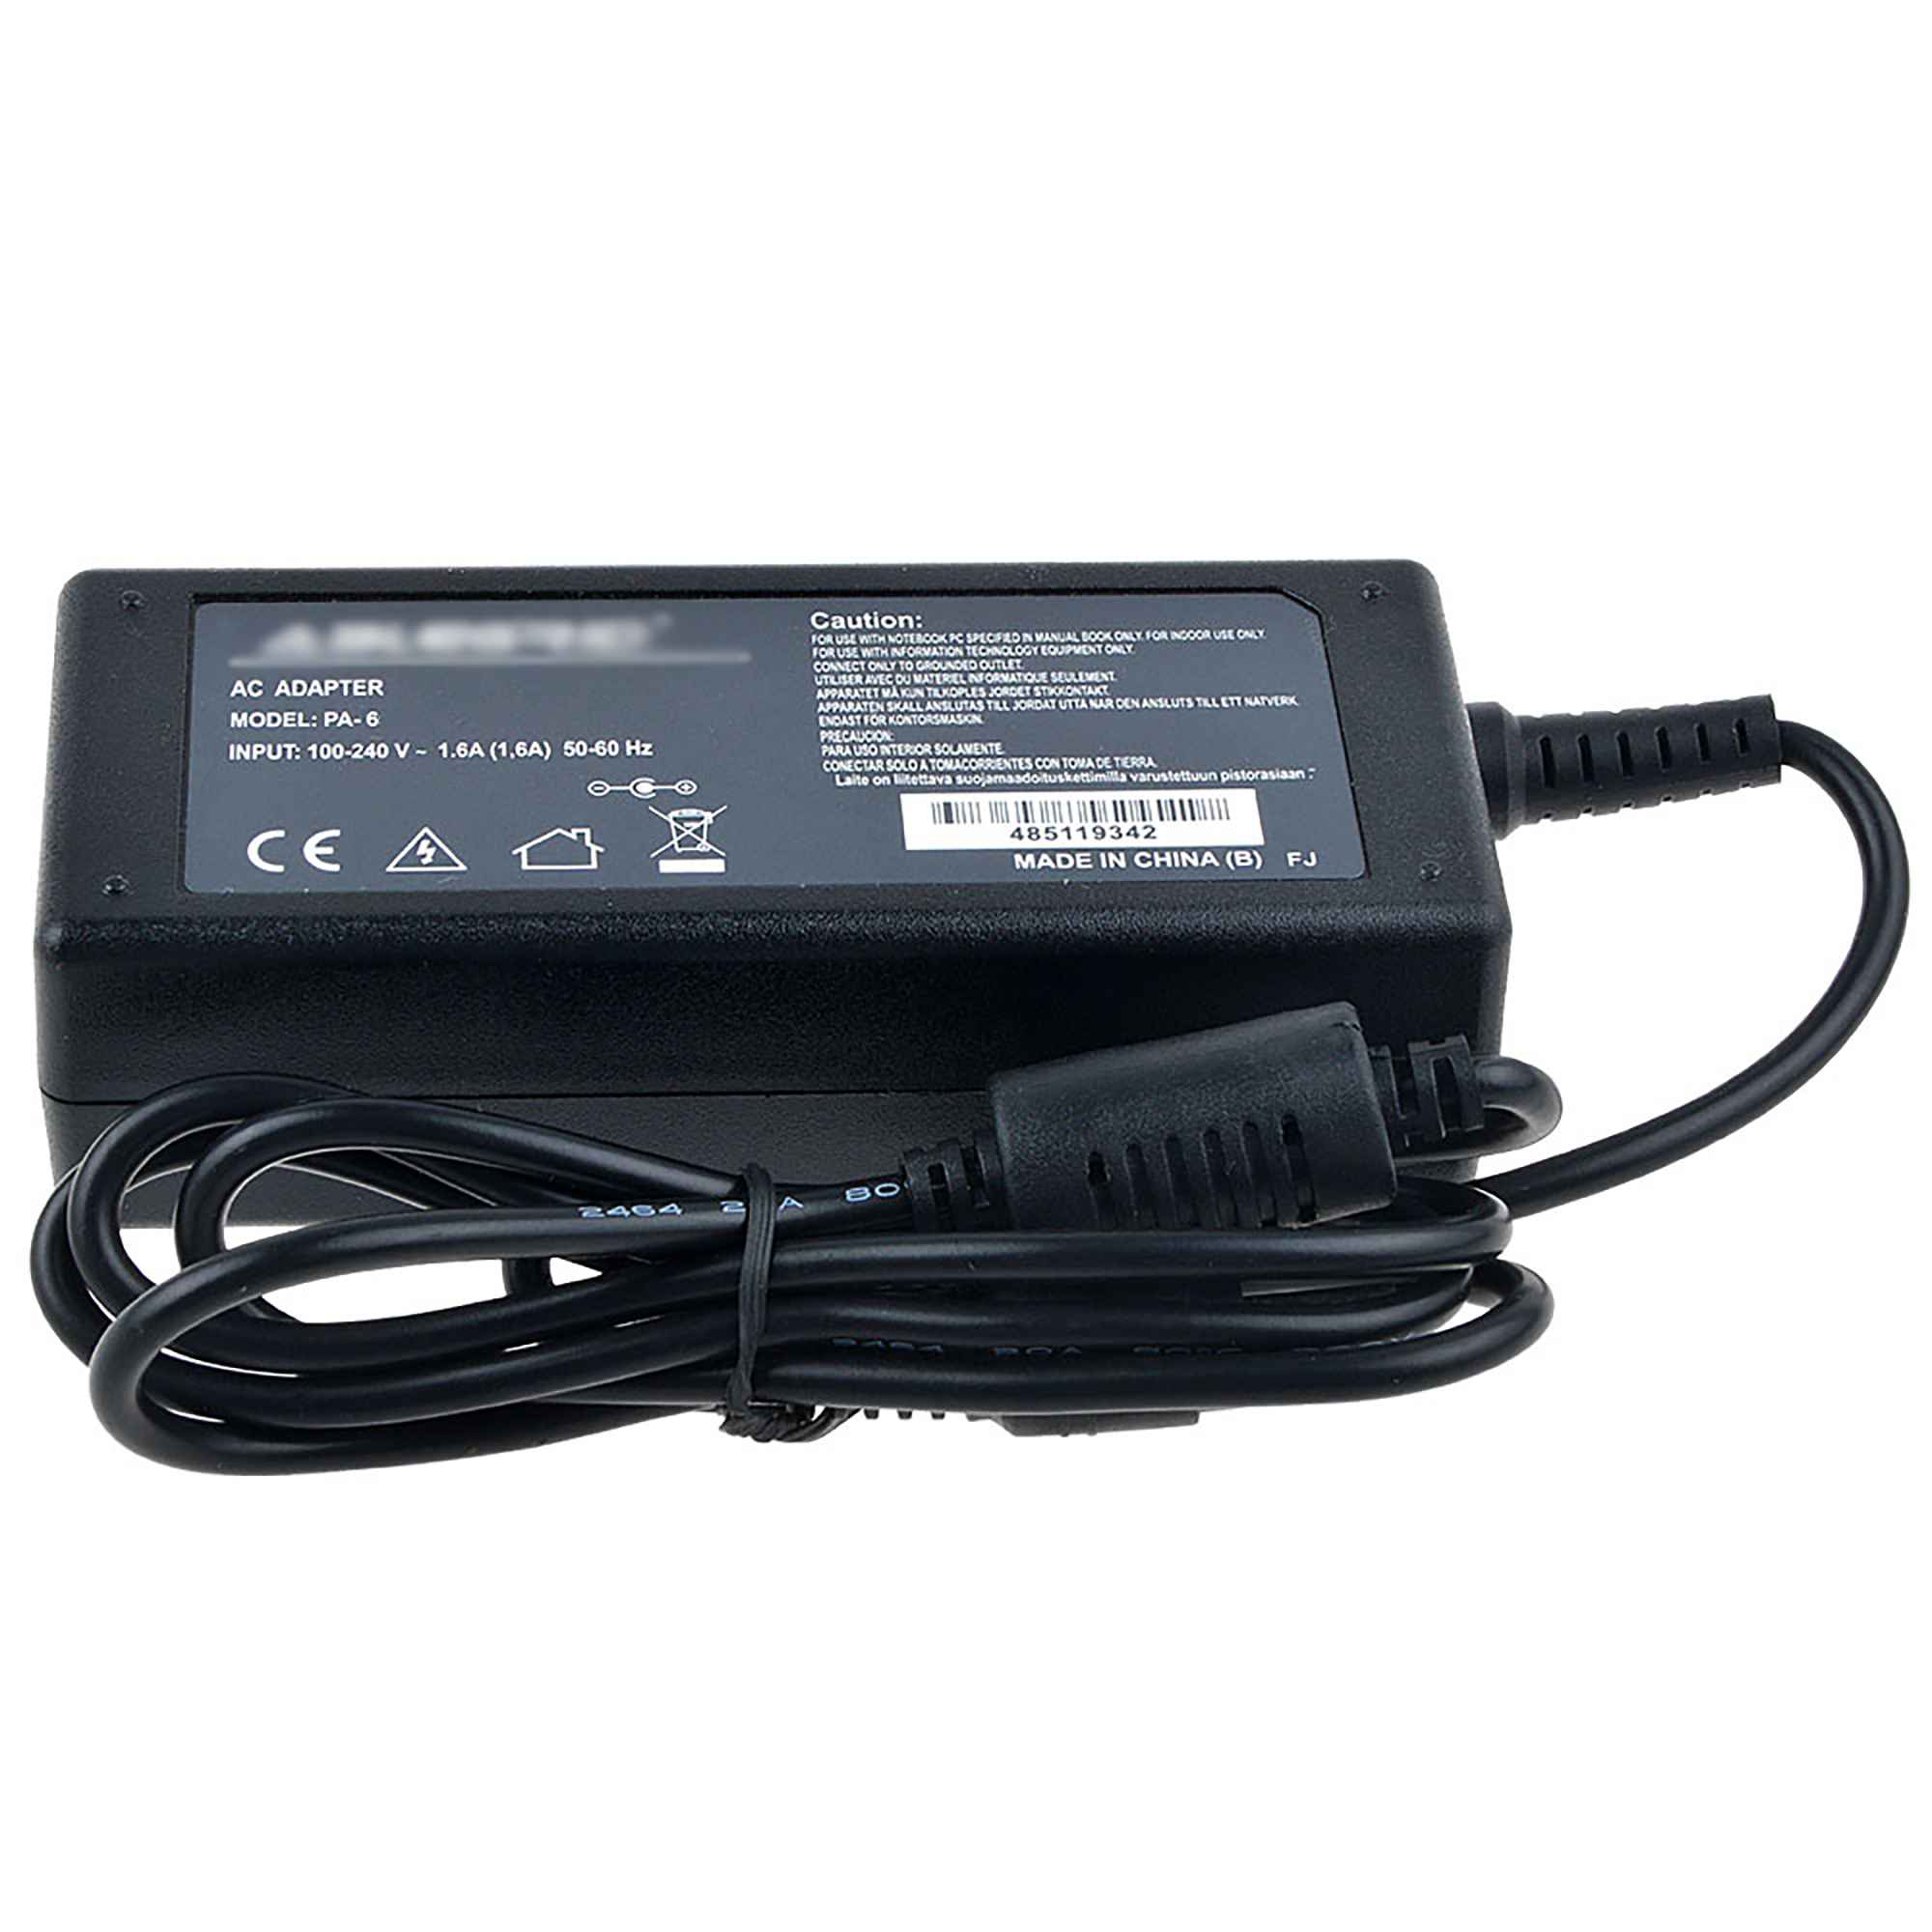 PKPOWER AC DC Adapter Replacement for LG SL6Y 3.1 Channel High-Resolution Sound Bar SoundBar Power - image 5 of 5